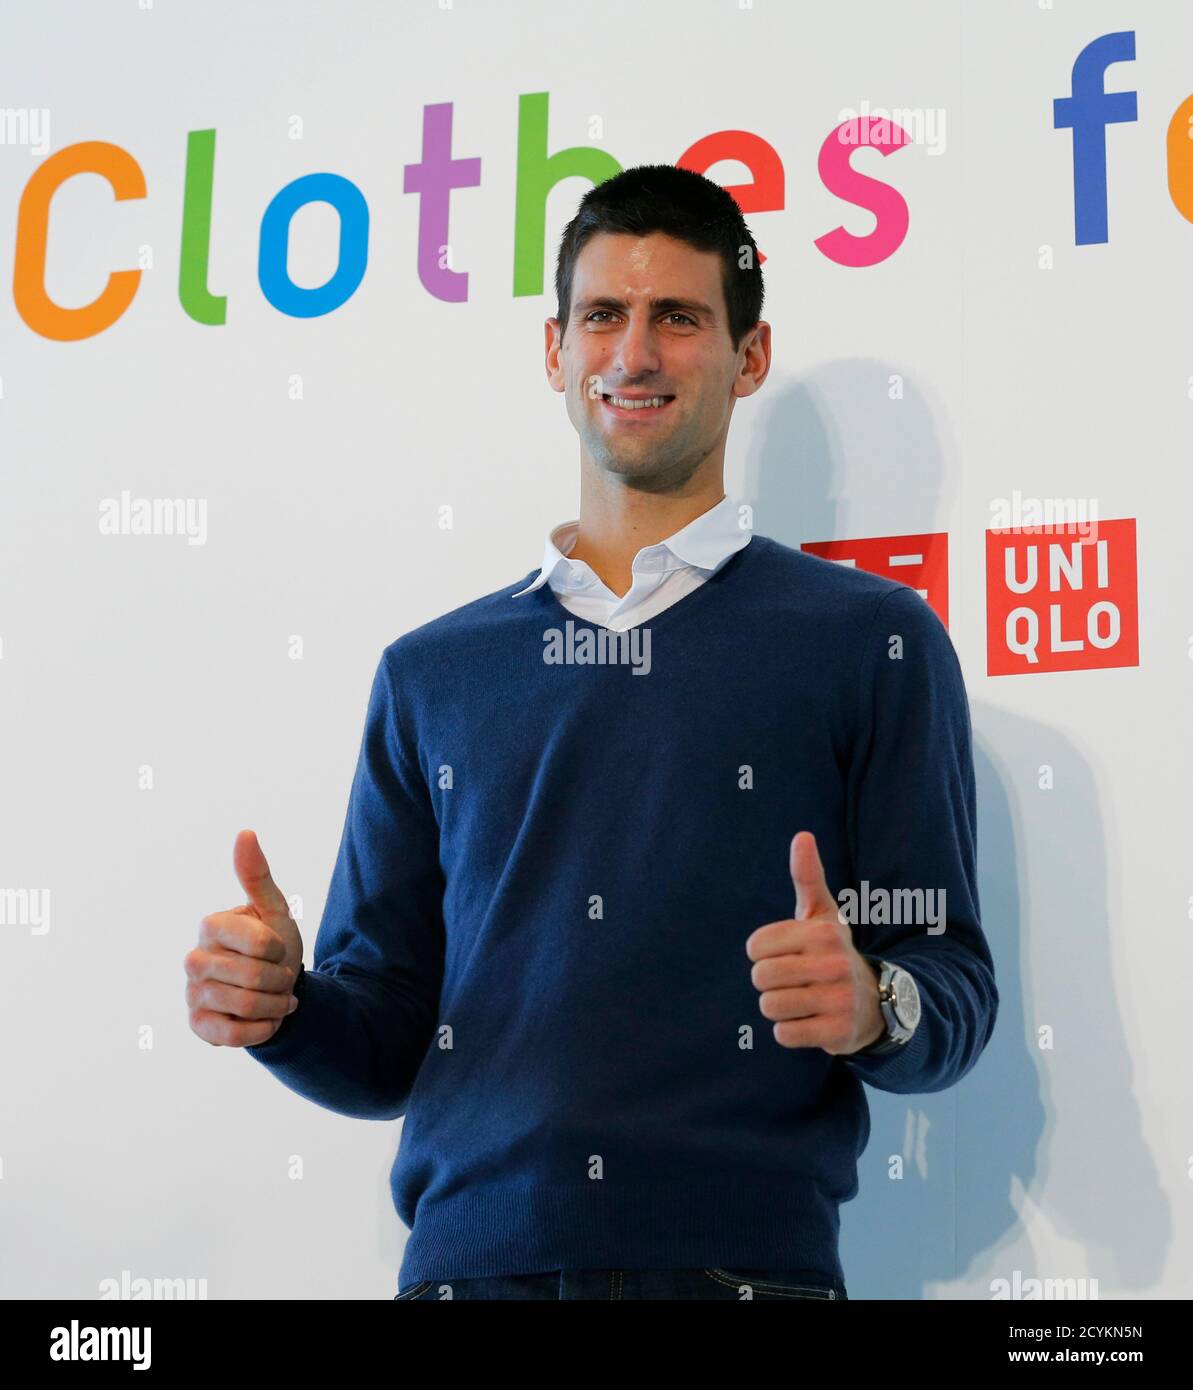 Tennis player and UNIQLO Brand Ambassador Novak Djokovic of Serbia poses  during a news conference announcing the launch of "Clothes for Smiles"  programme in Tokyo, October 16, 2012. Uniqlo will establish a